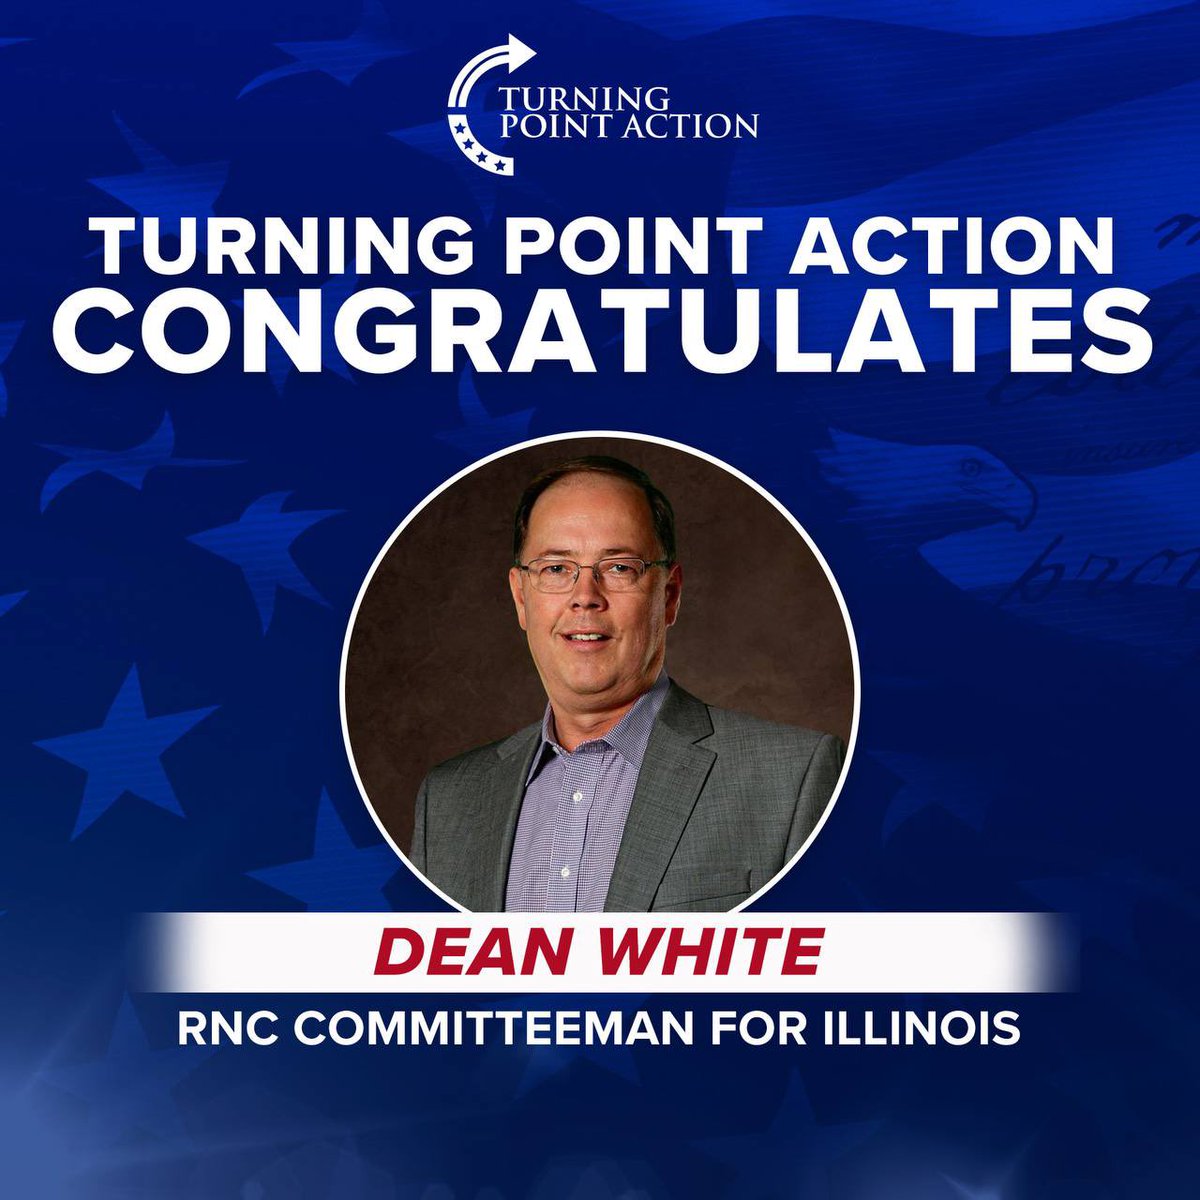 Huge congratulations to @_DeanRWhite for his successful win on becoming the next RNC Committeeman for the @ILGOP 🇺🇸 Dean is a fighter for the grassroots & will represent Illinois well at the RNC!